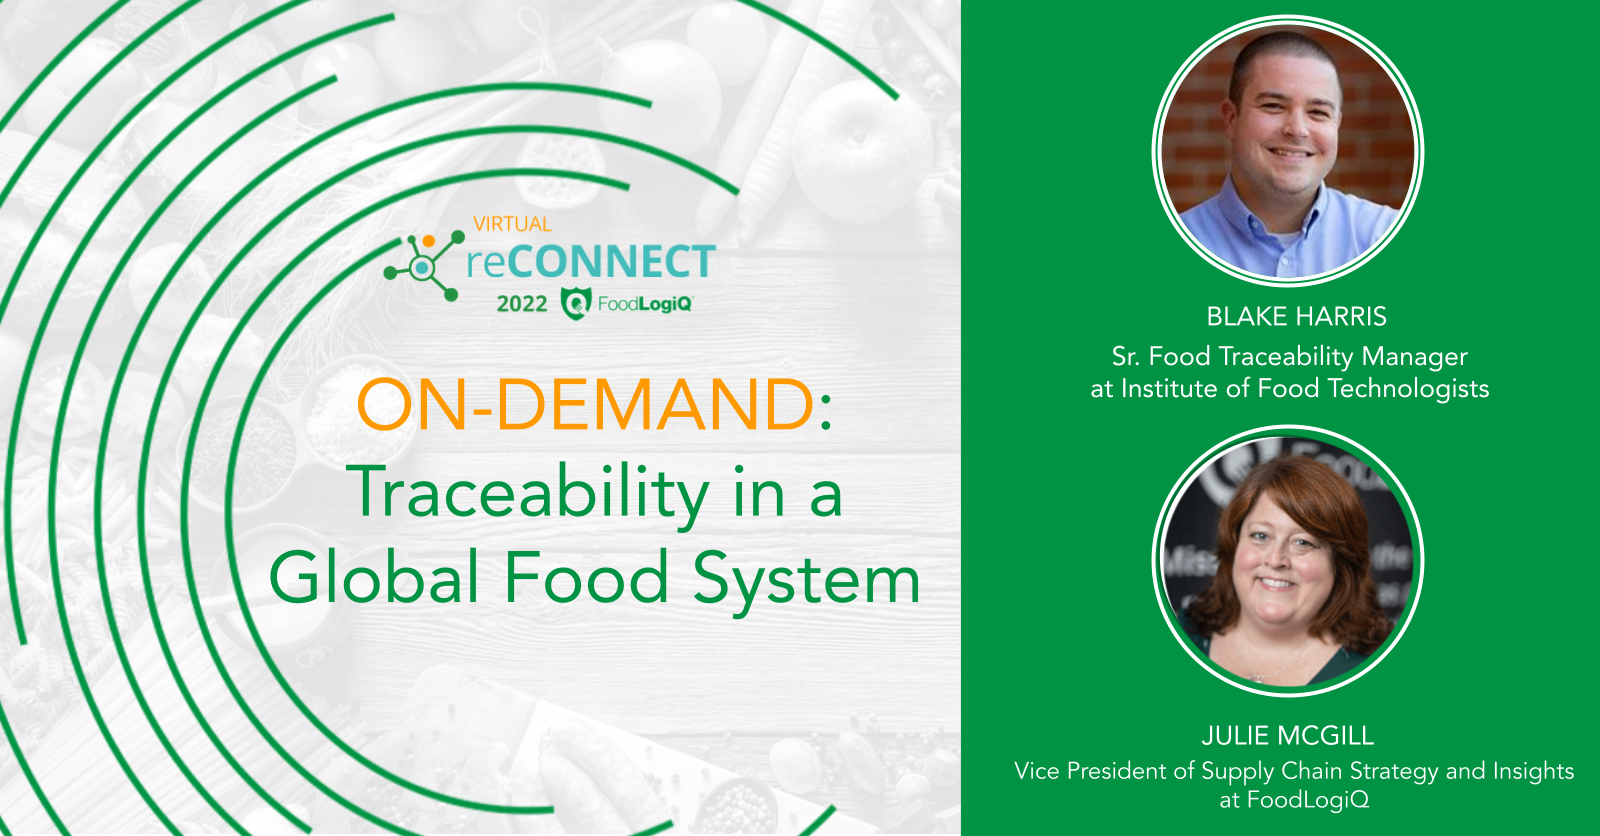 Traceability in a Global Food System